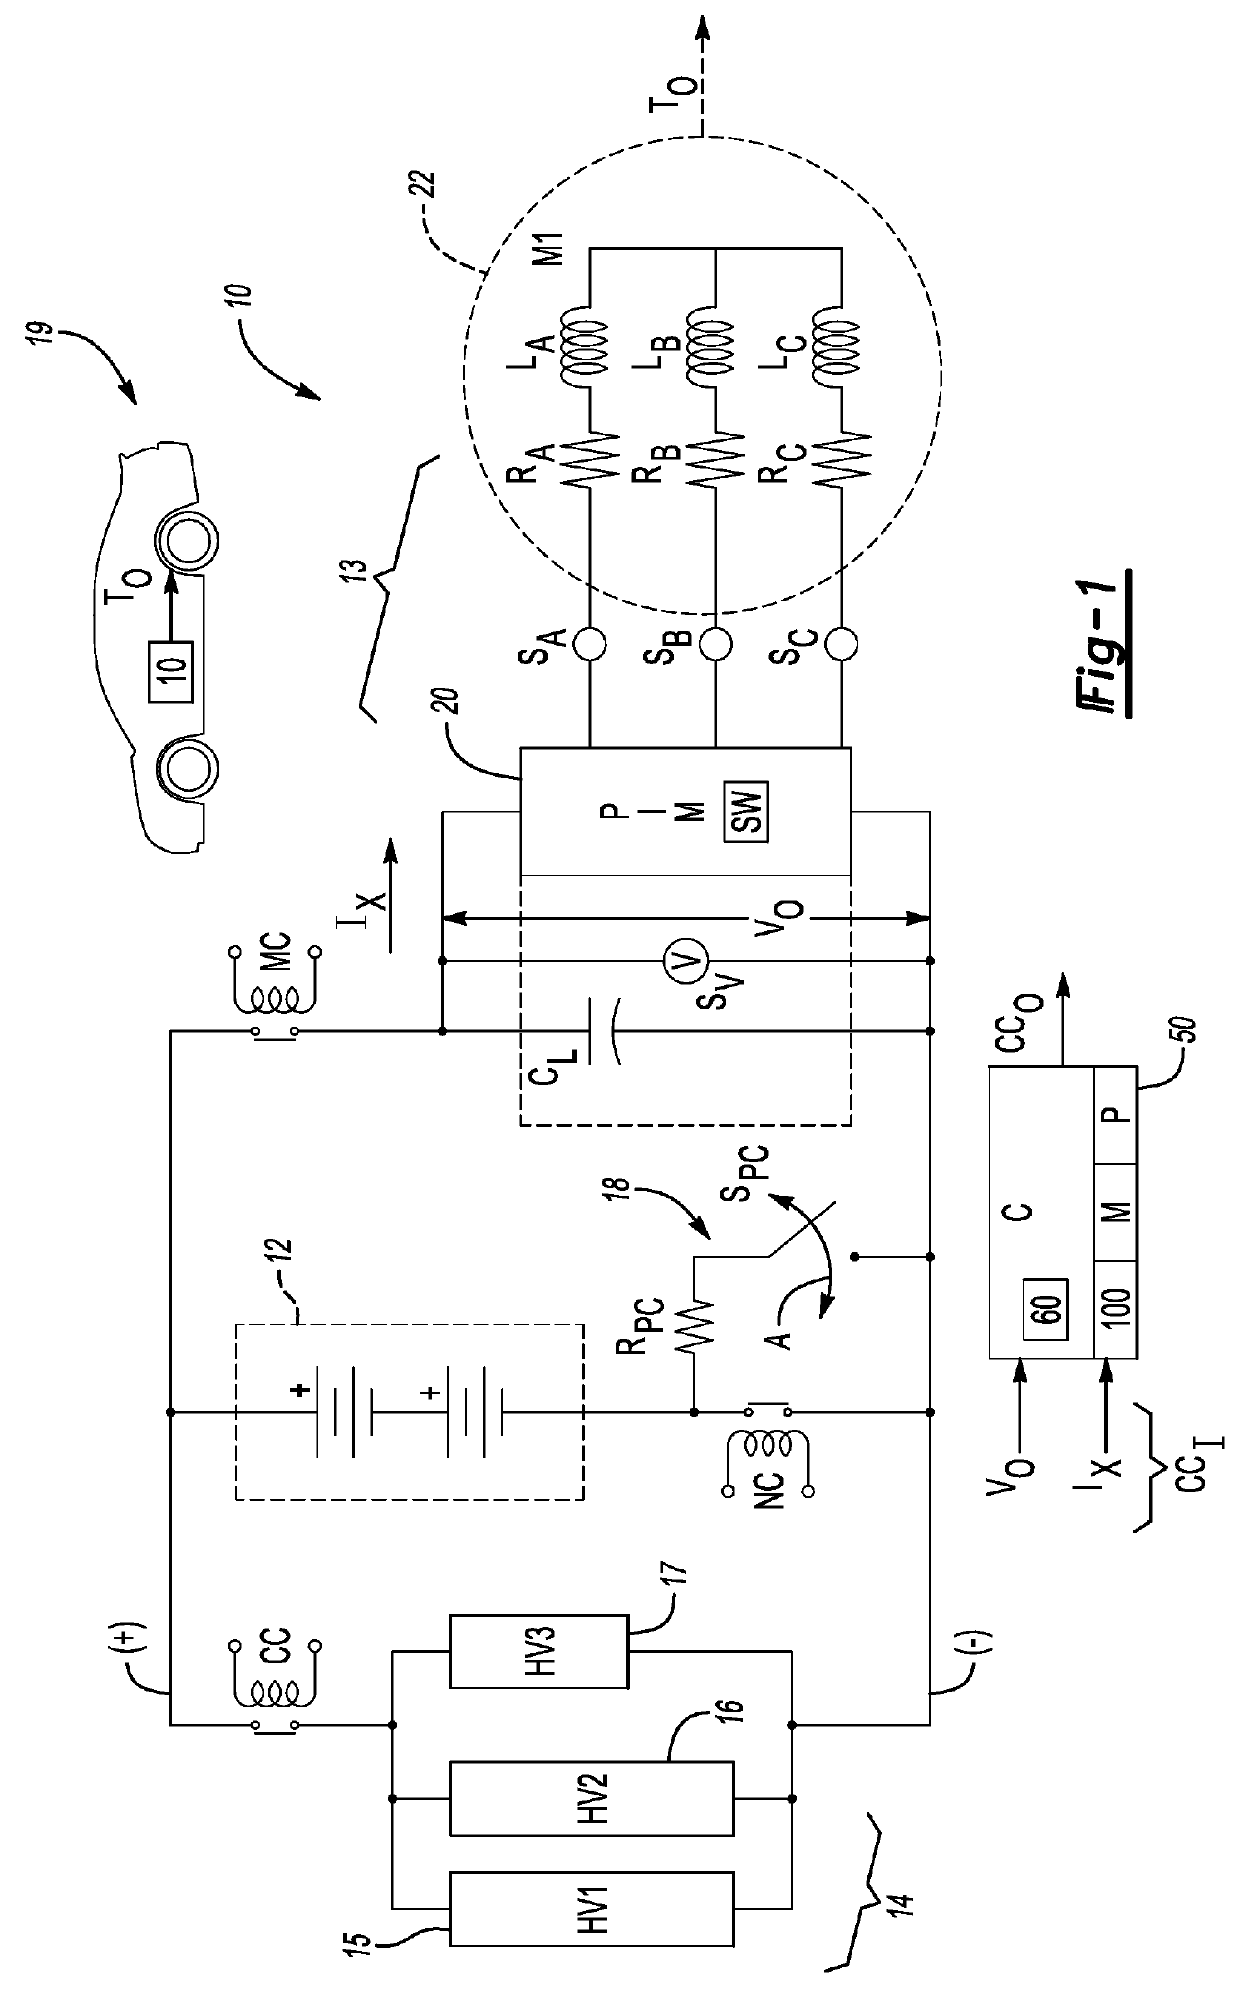 Method and system for diagnosing contactor health in a high-voltage electrical system